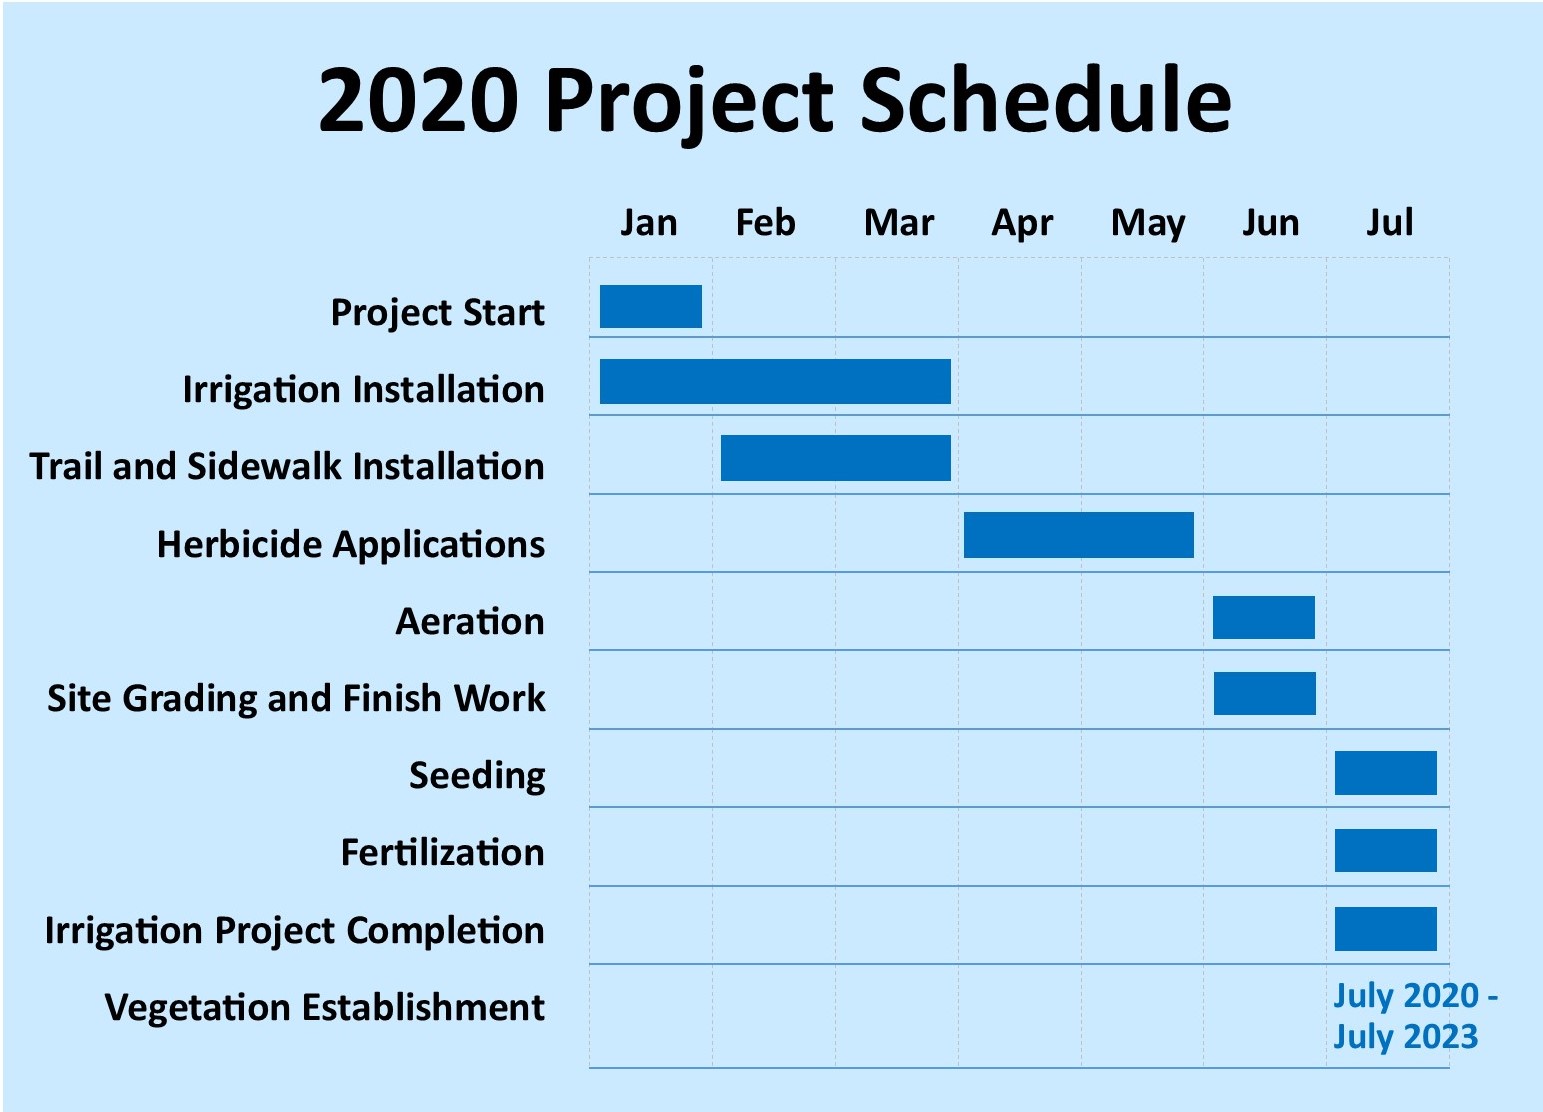 project scheule timeline graphic